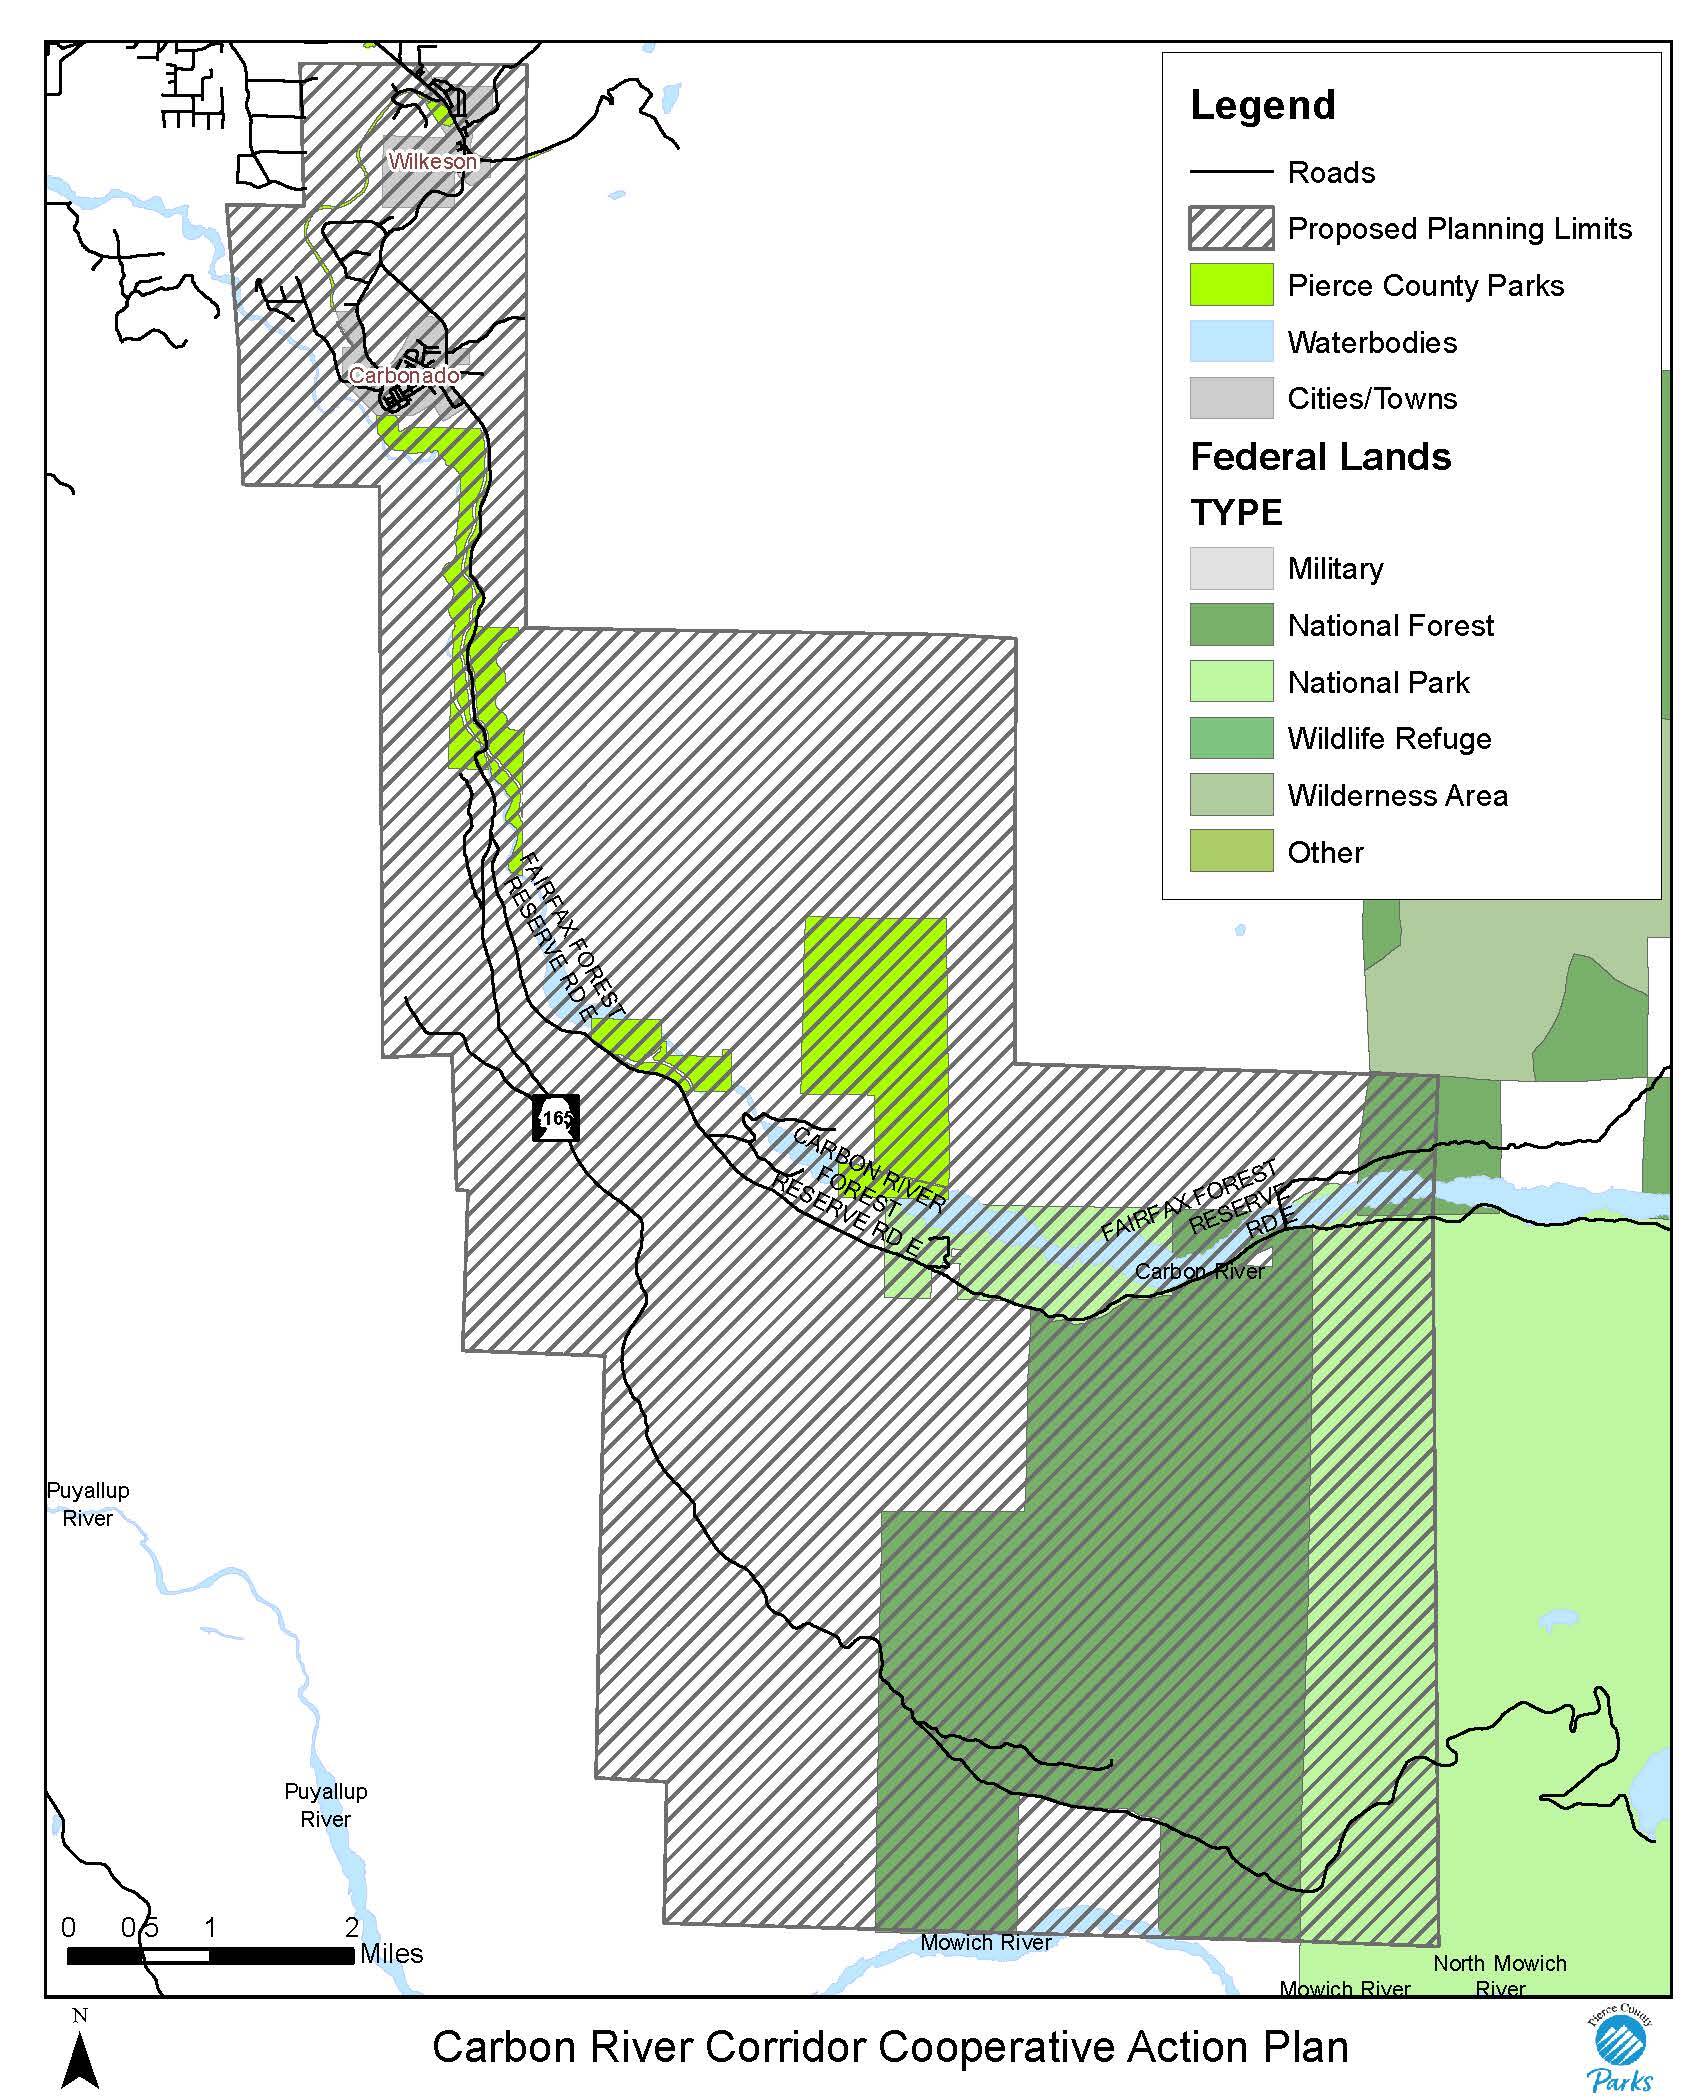 This more detailed diagram, provided by Pierce County, shows the planning area covered by the Carbon River Corridor Cooperative Action Plan. It stretches from the towns of Wilkeson and Carbonado all the way to the Carbon River entrance of the Mount Rainer National Park.